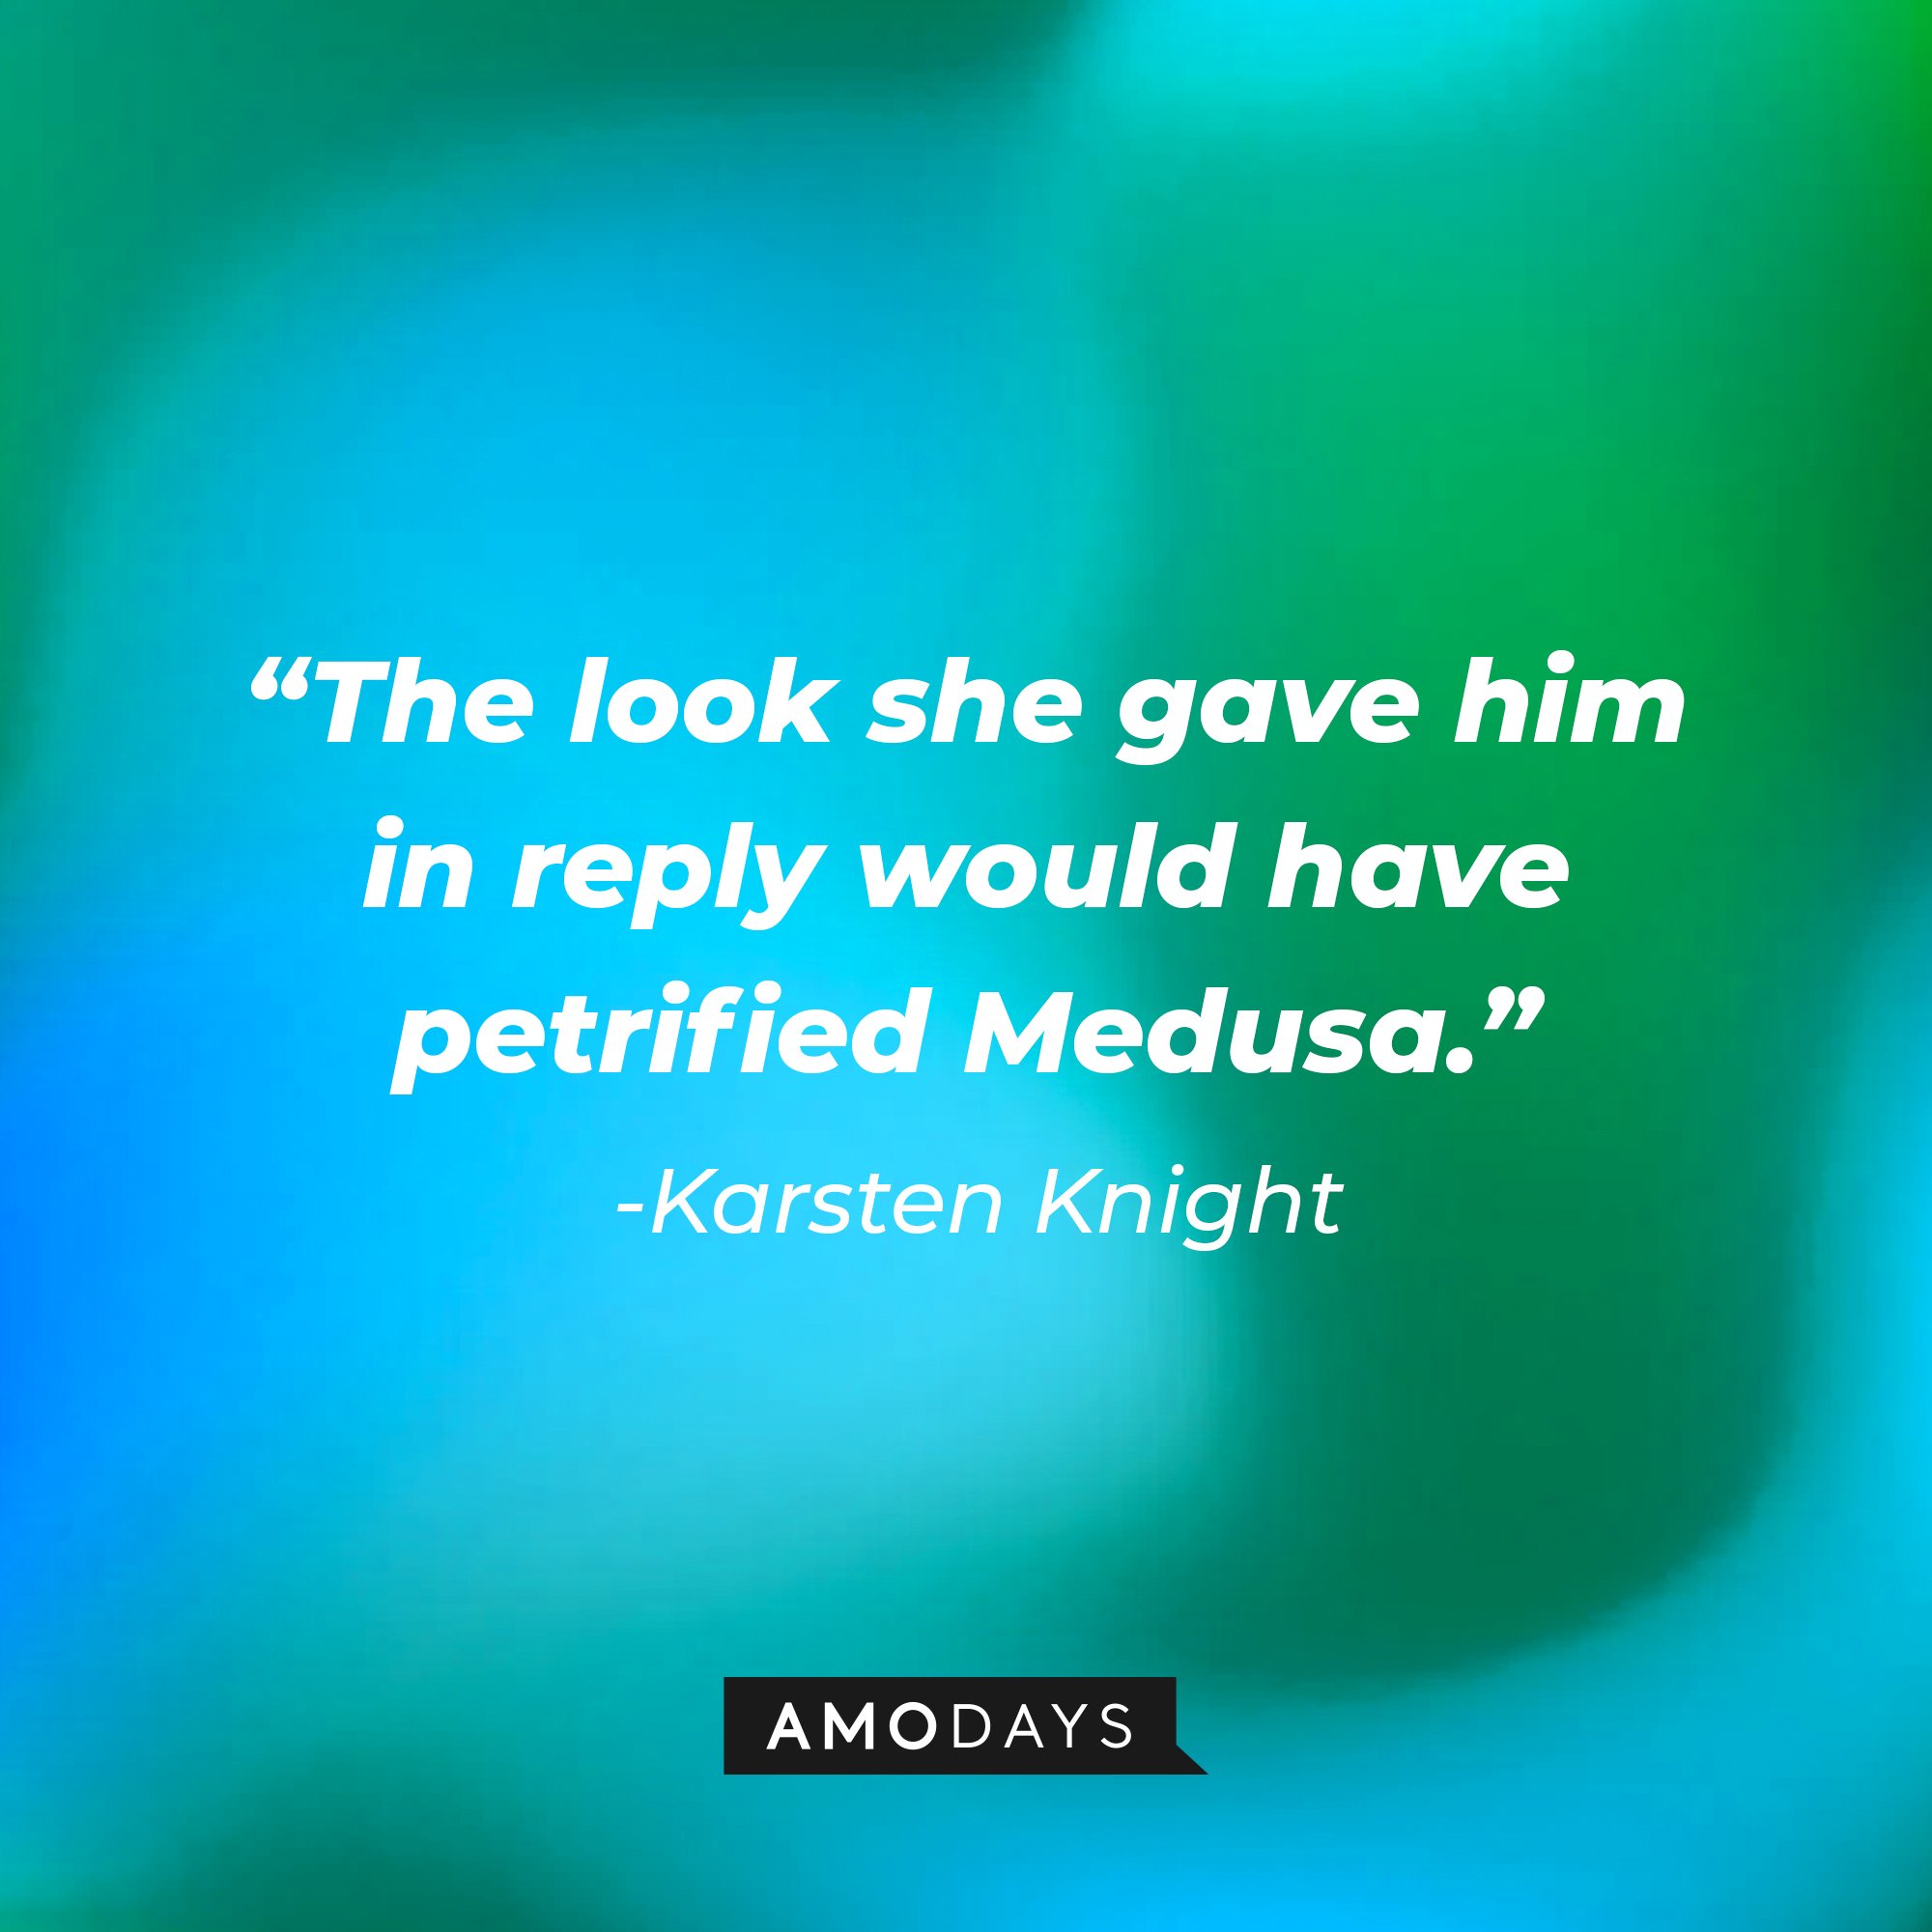   Karsten Knight’s quote: “The look she gave him in reply would have petrified Medusa.” | Image: AmoDays